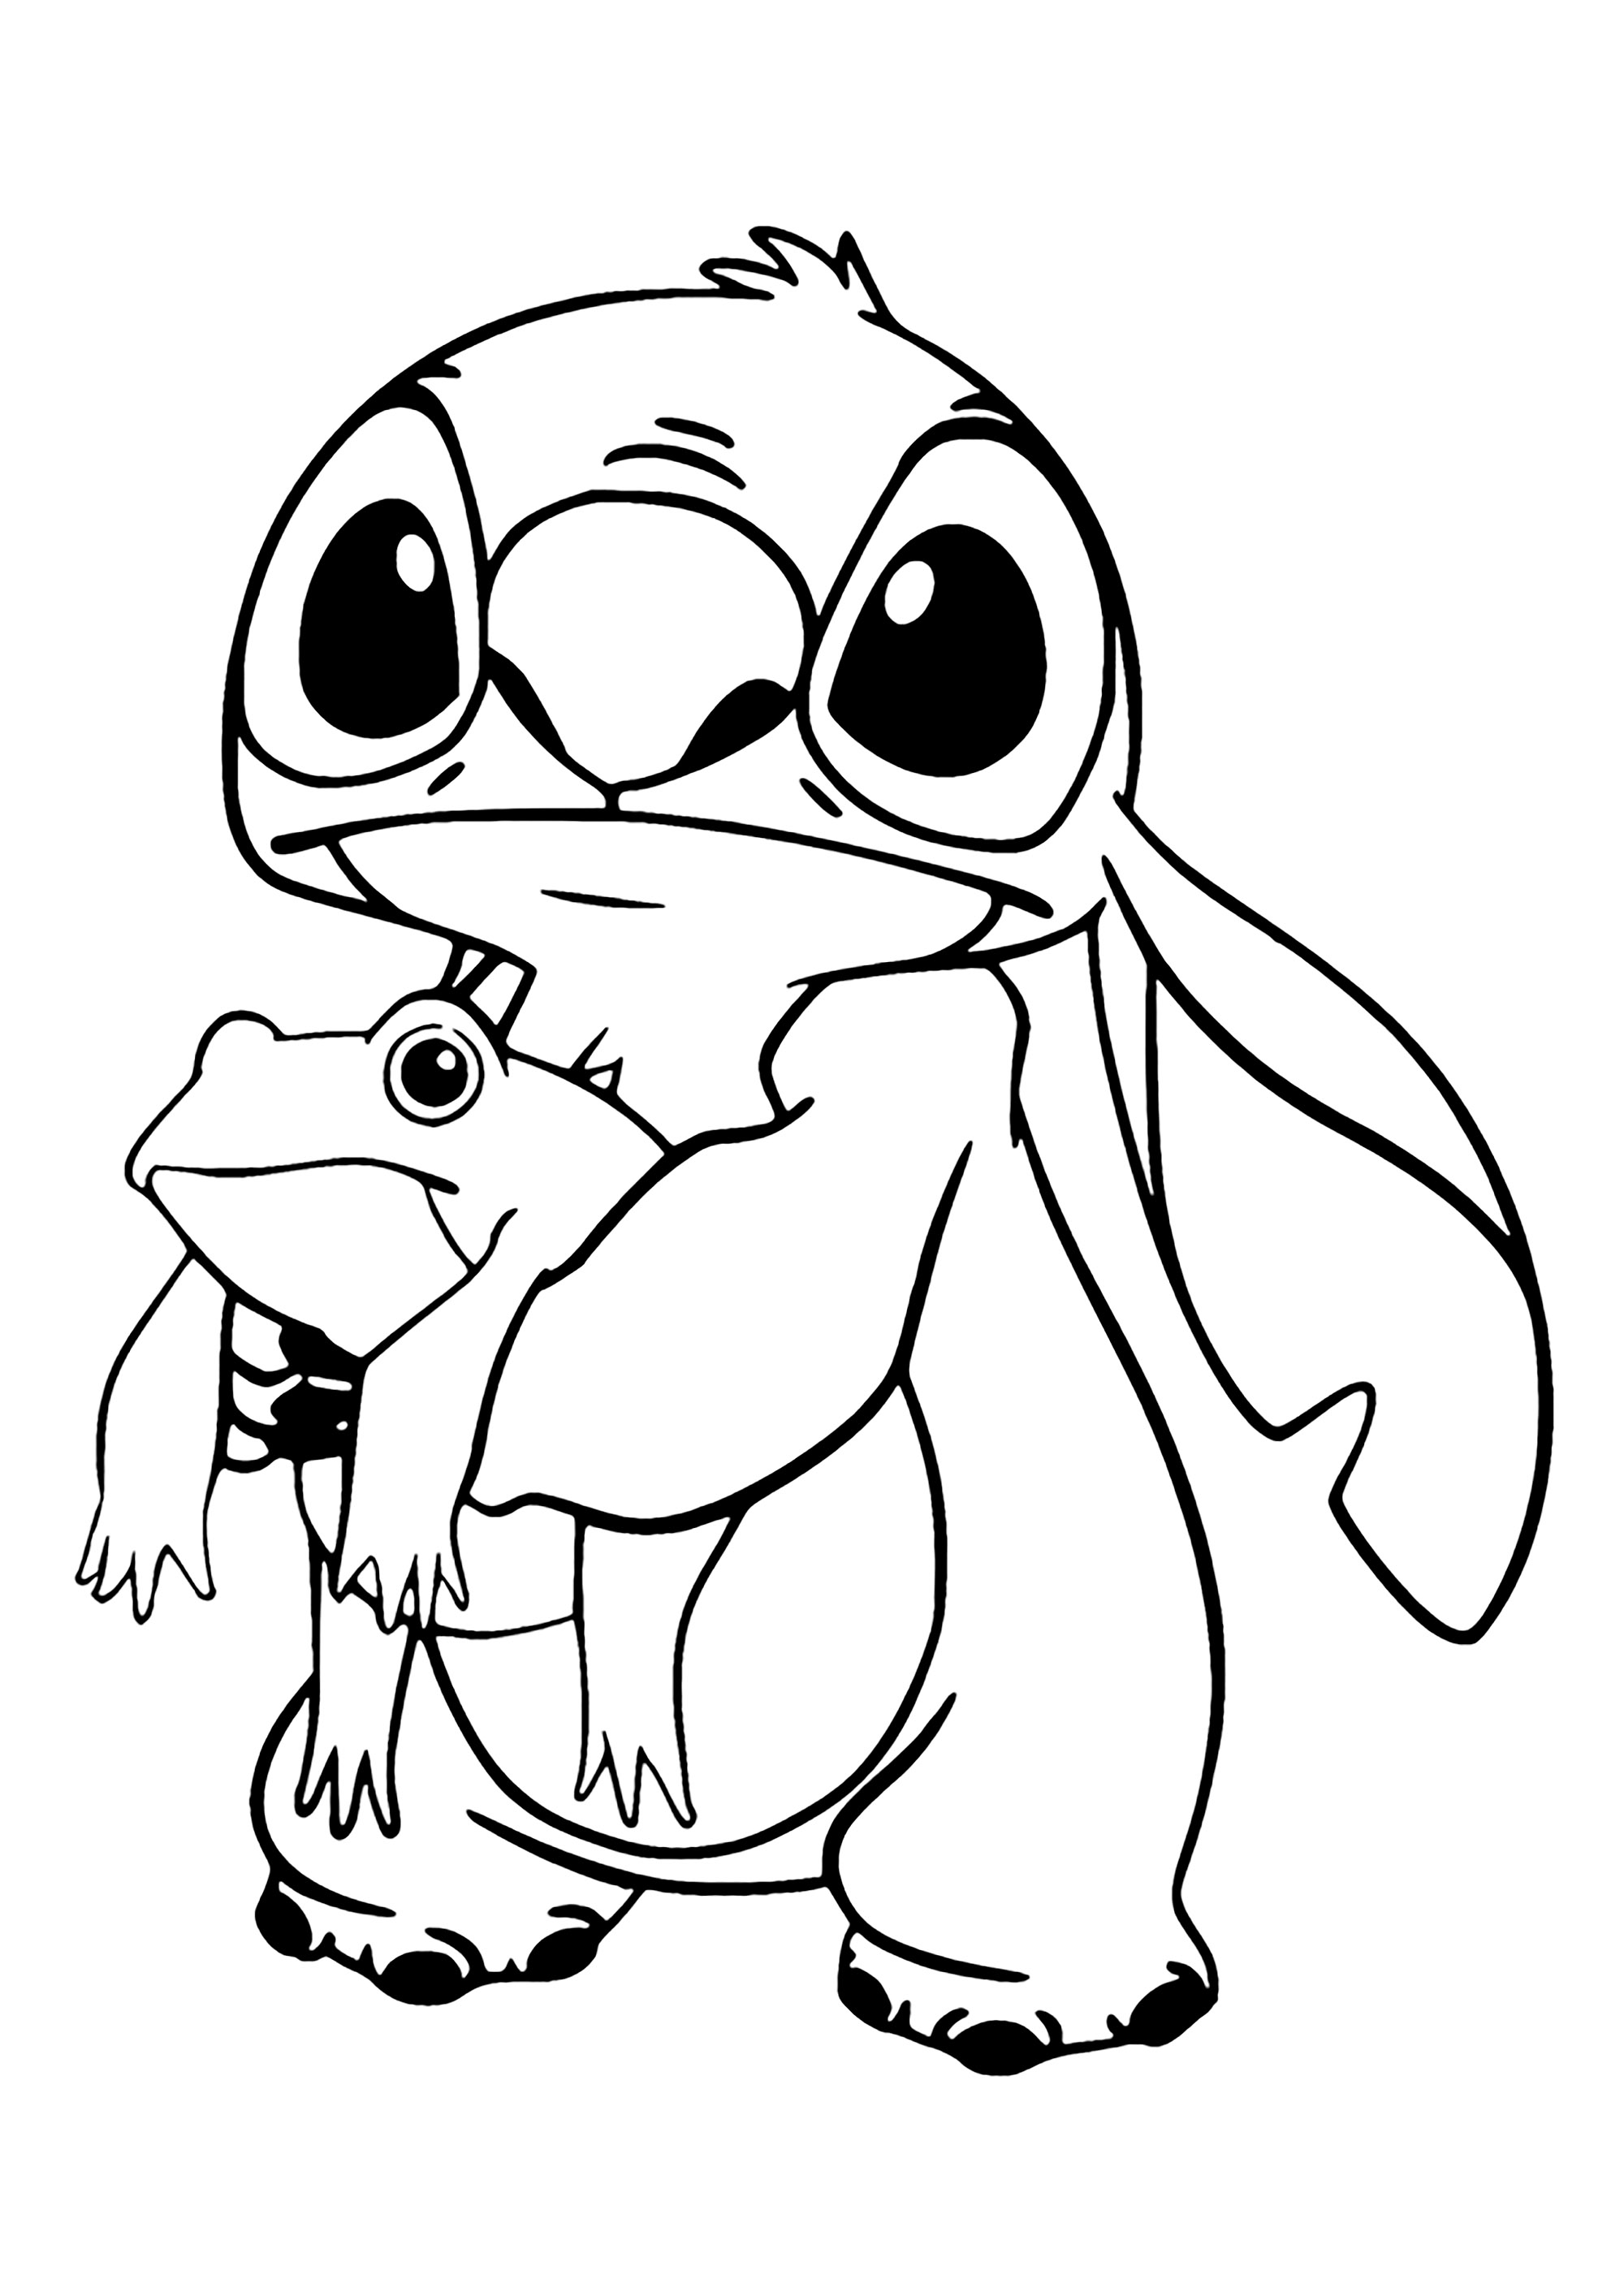 Coloring Stich with a frog